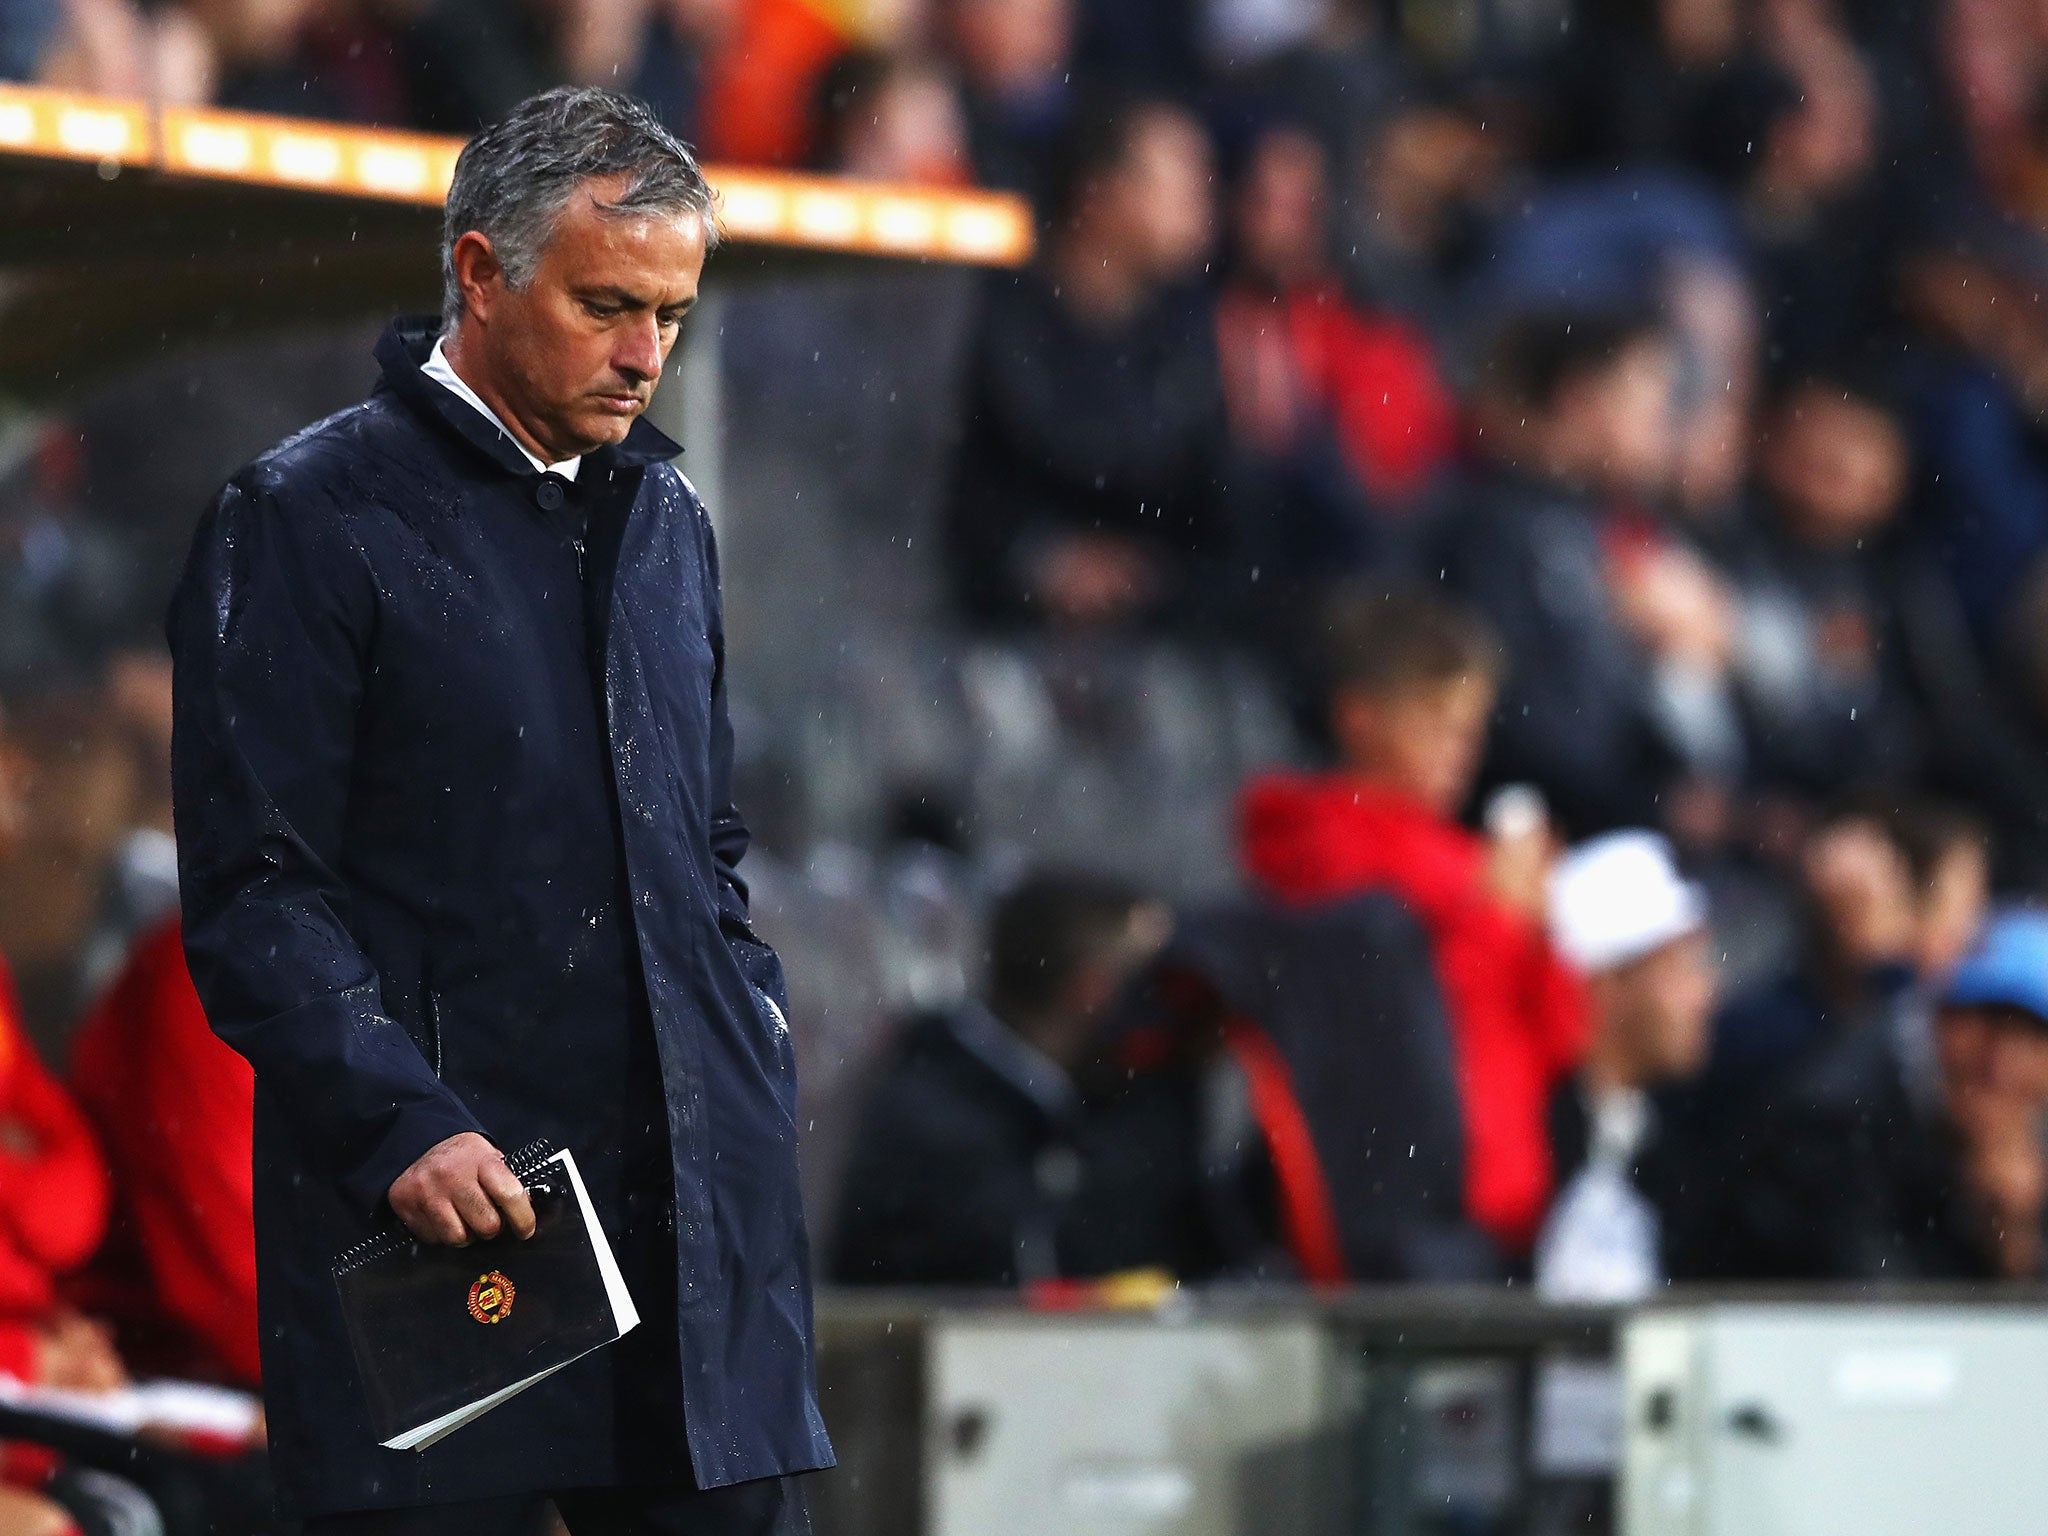 The Portuguese has struggled to rediscover United's ruthless streak